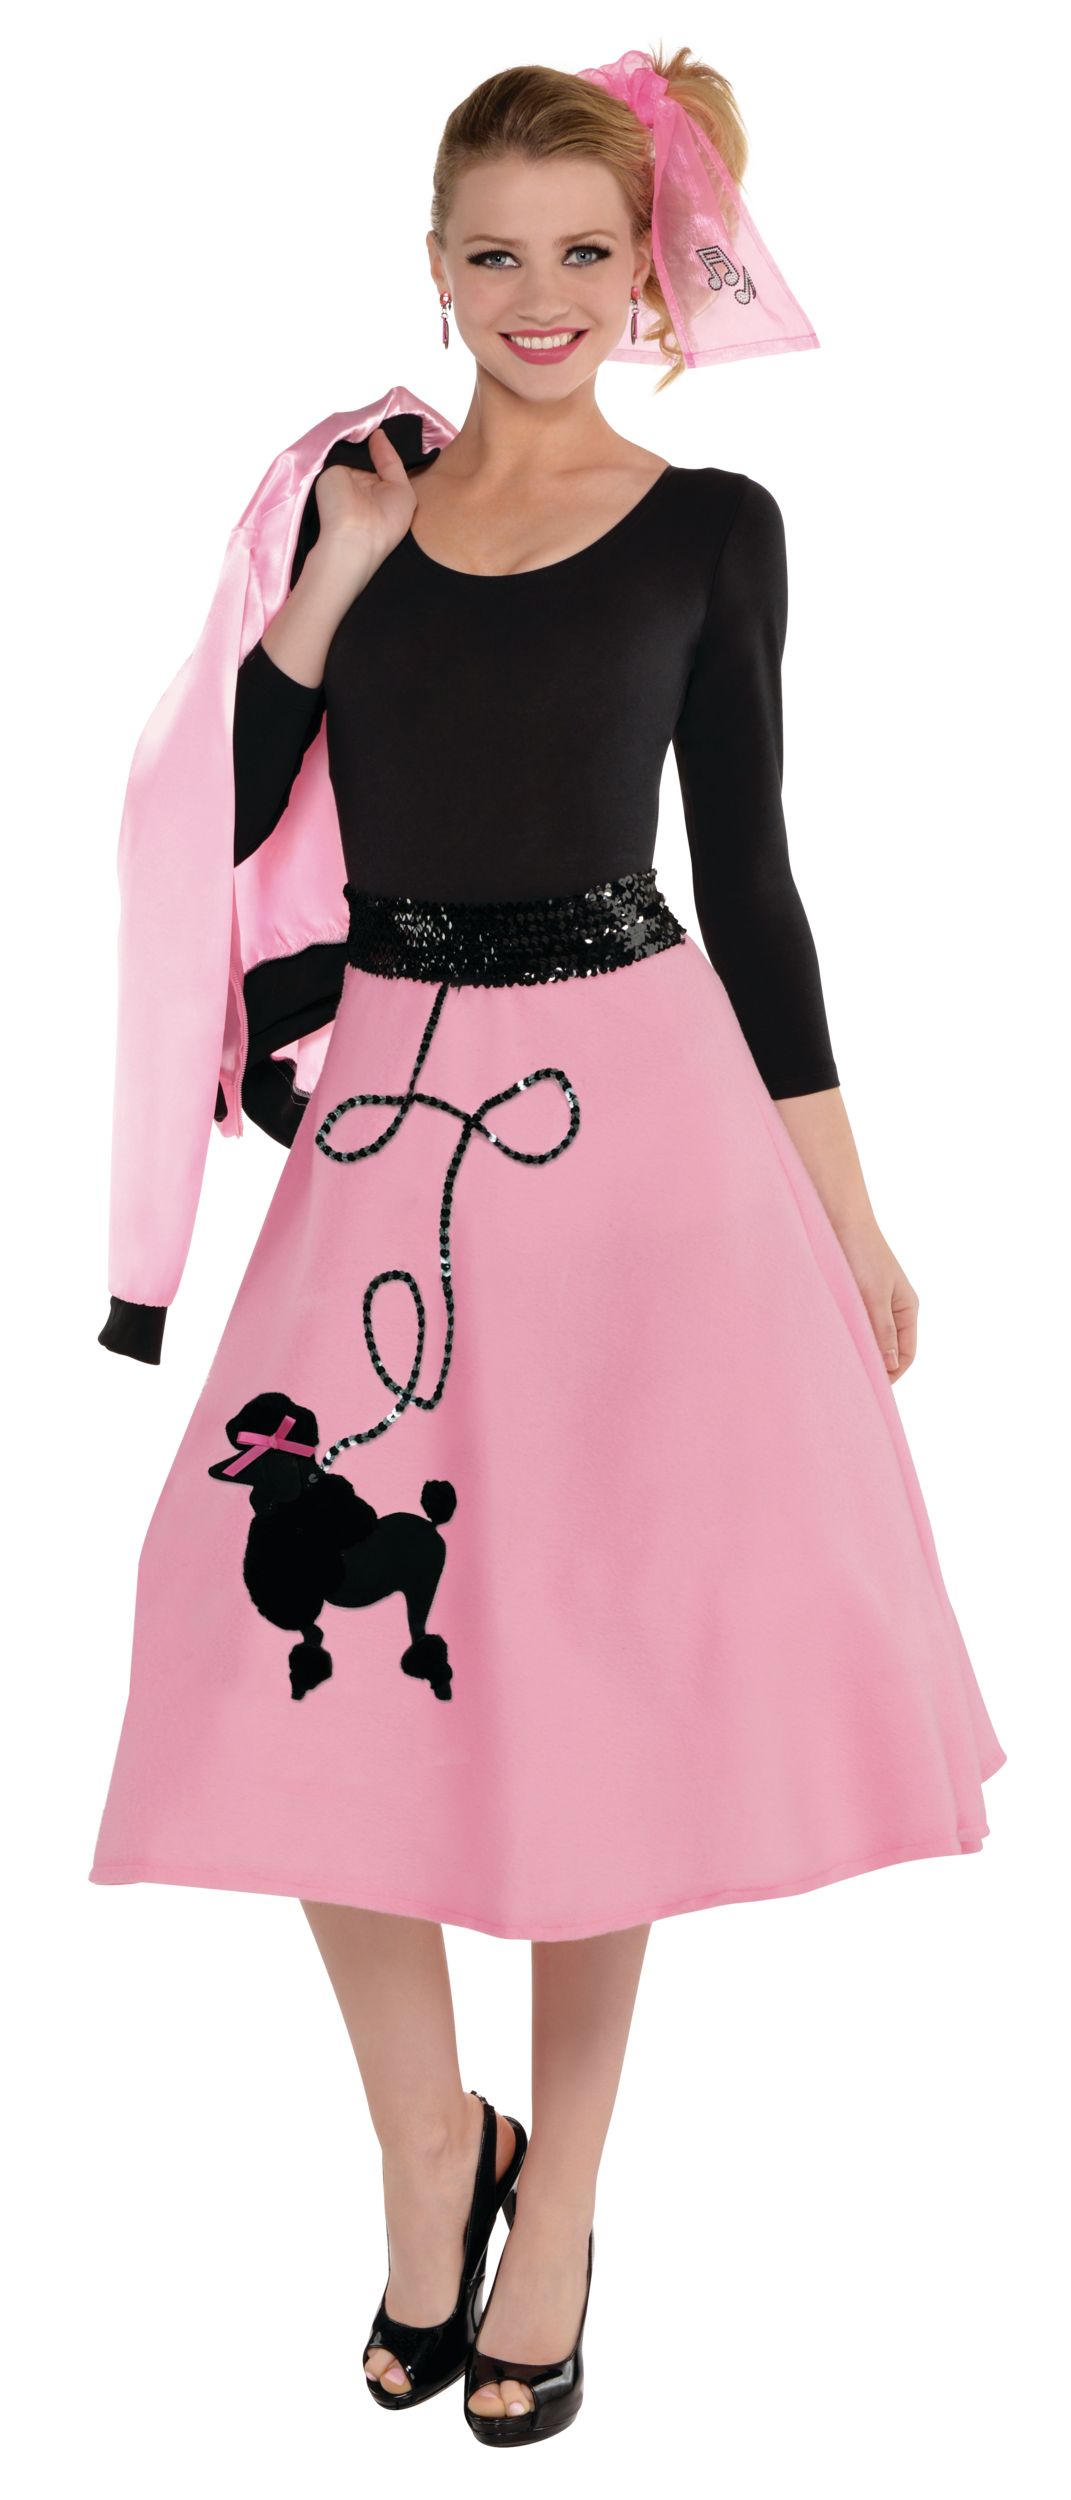 Adult 1950s Sequin Poodle Skirt, Pink/Black, One Size, Wearable Costume  Accessory for Halloween